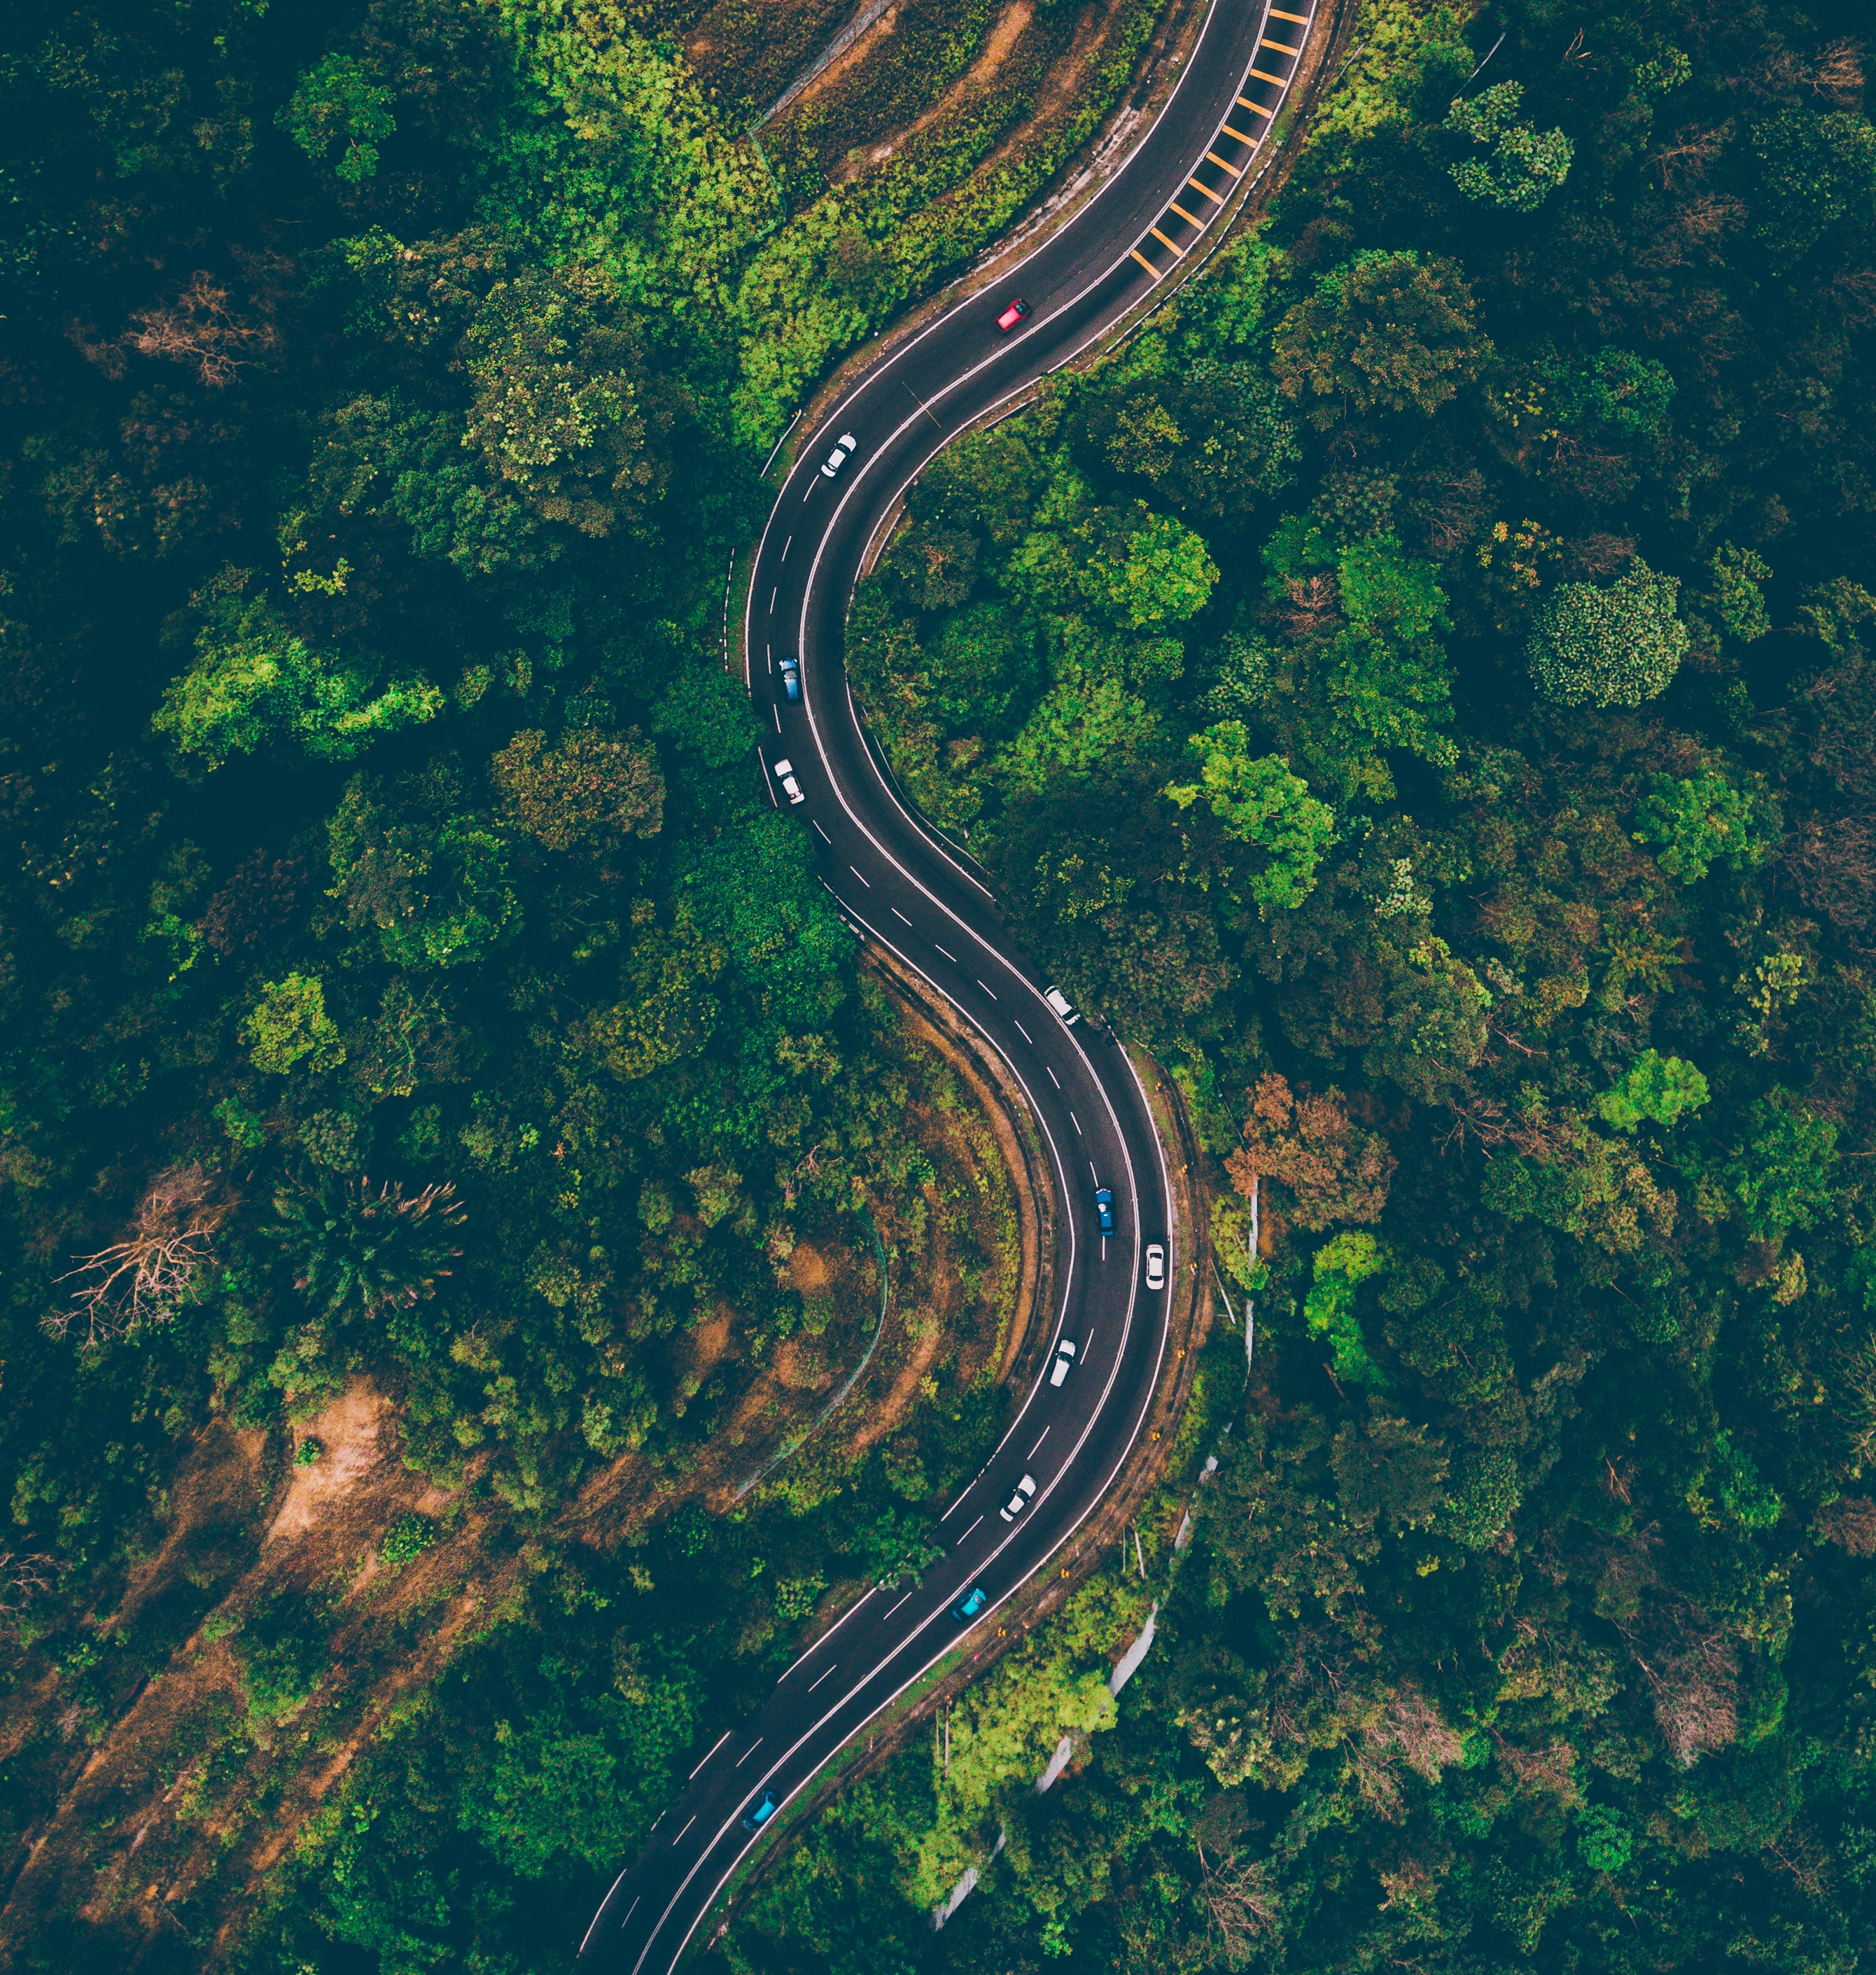 road, sinuous, nature, trees, view from above, winding, malaysia, batang kali